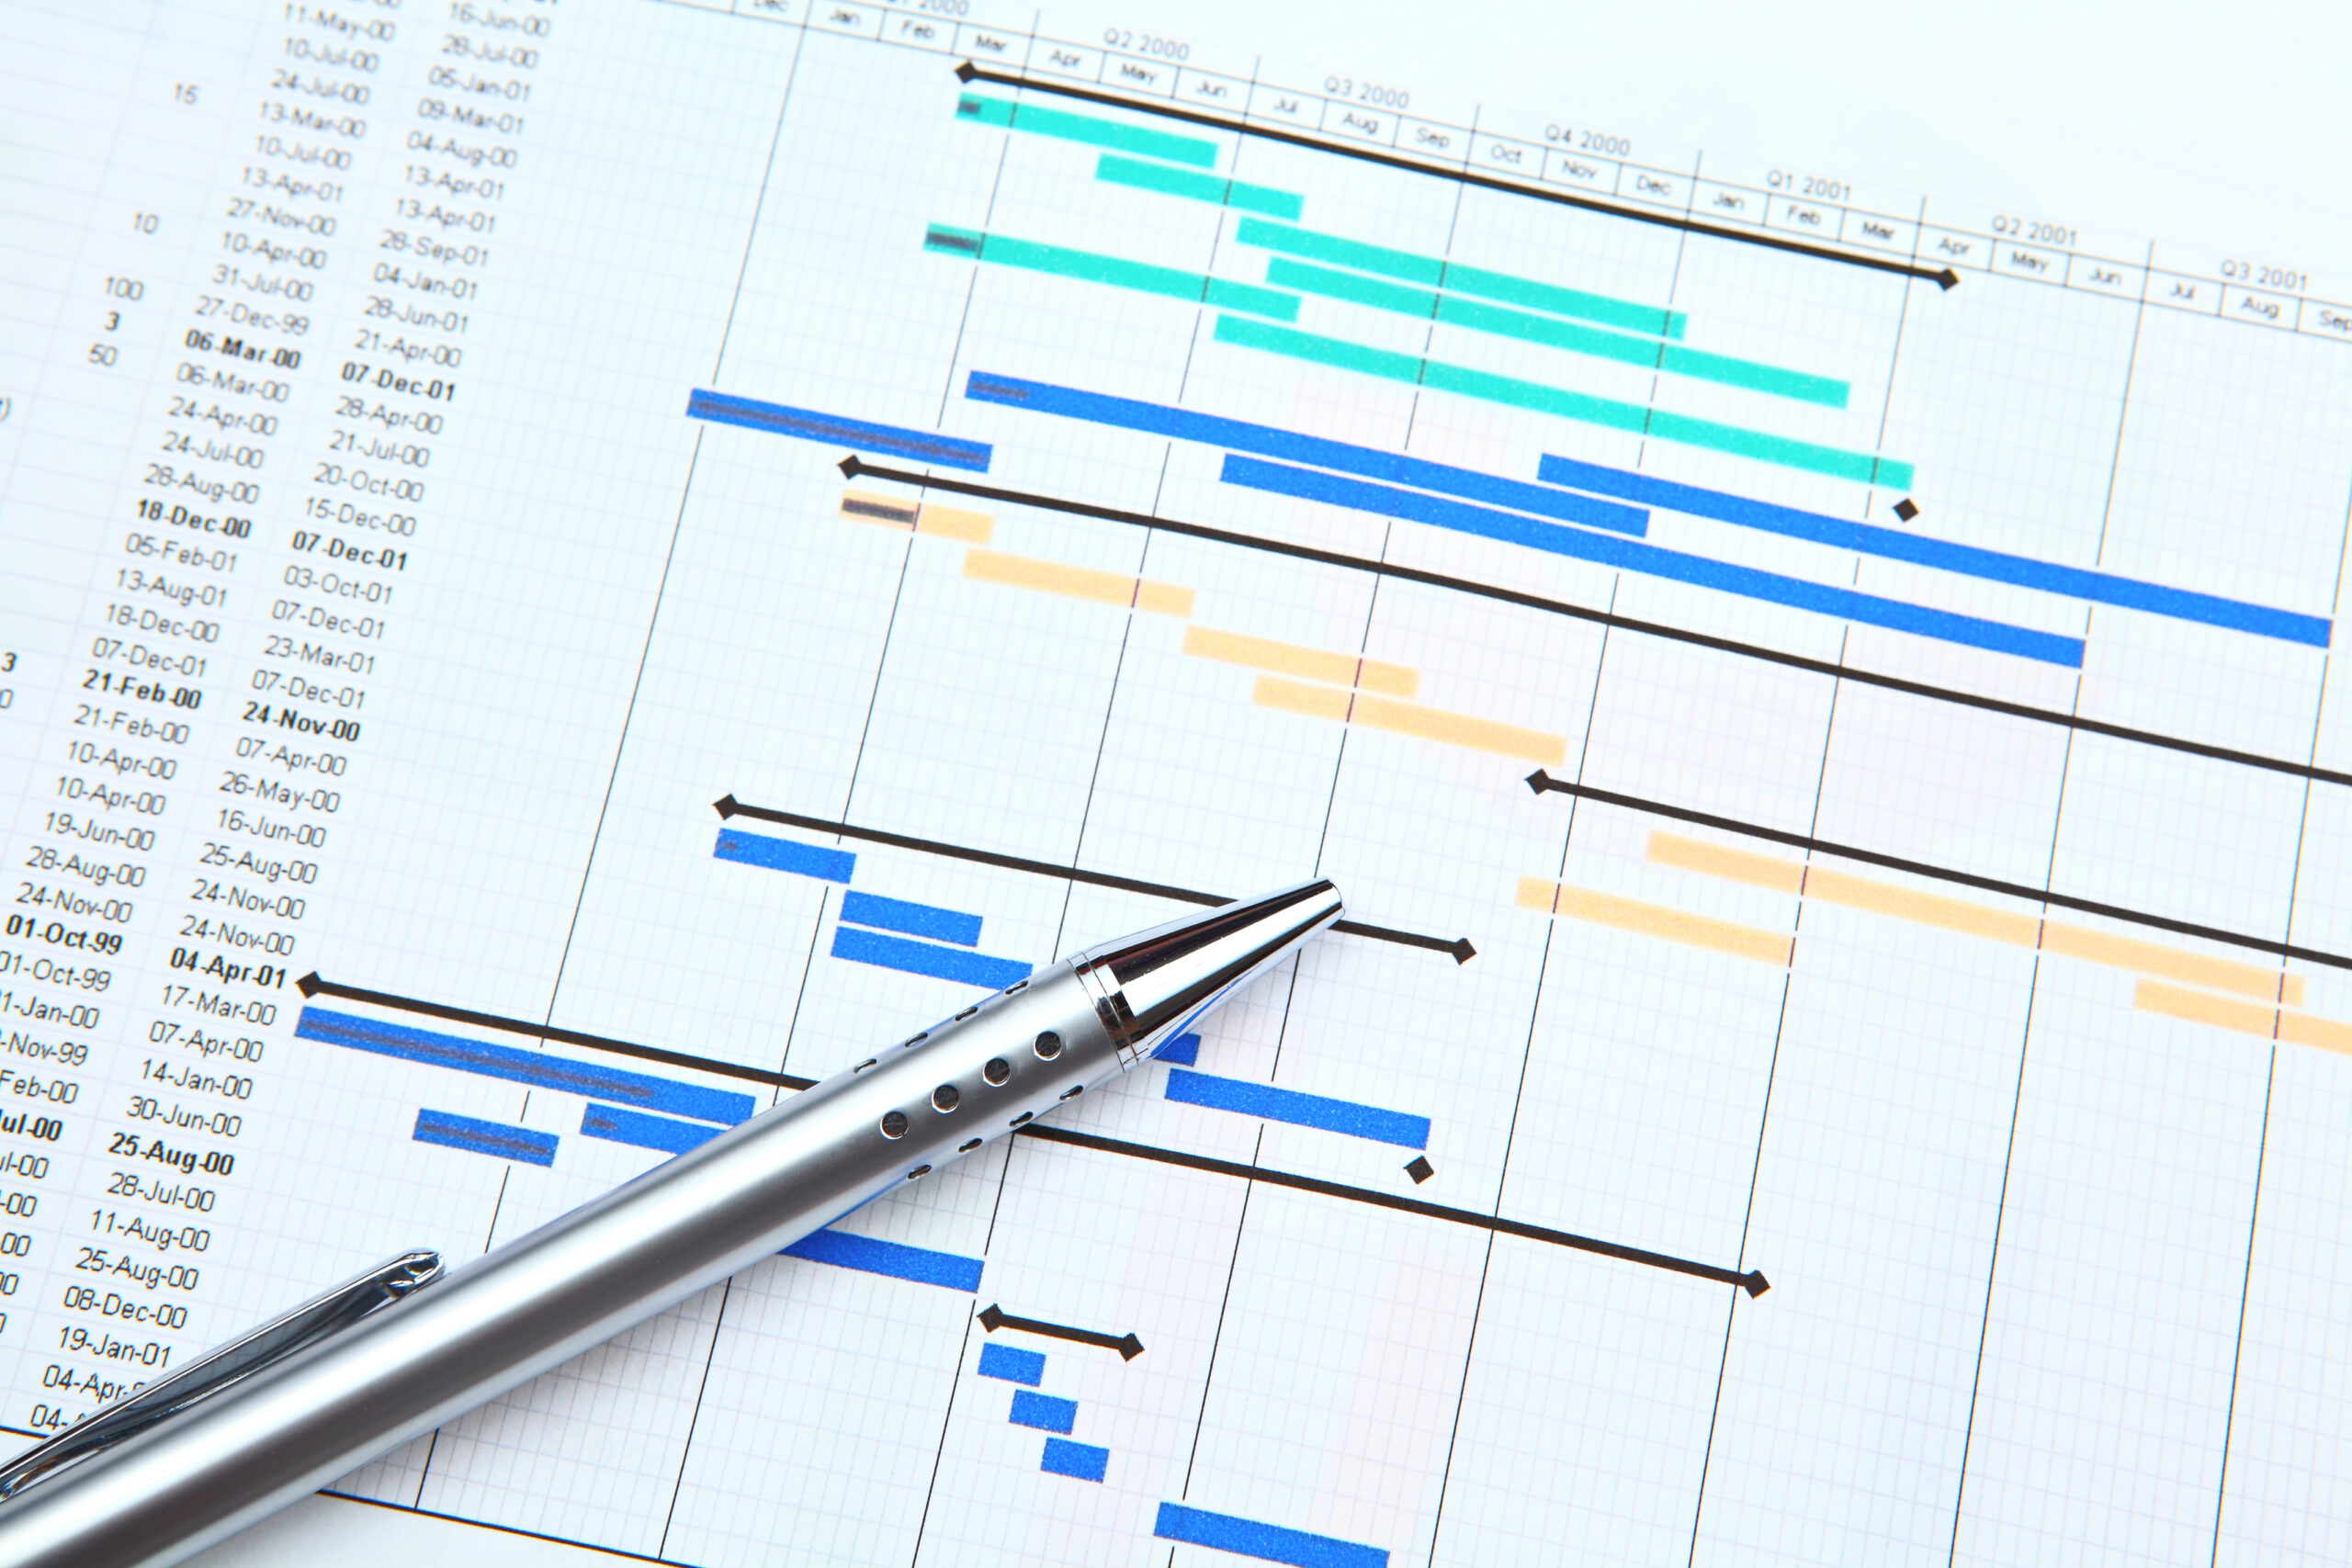 Example of a Gantt chart used to manage construction projects.